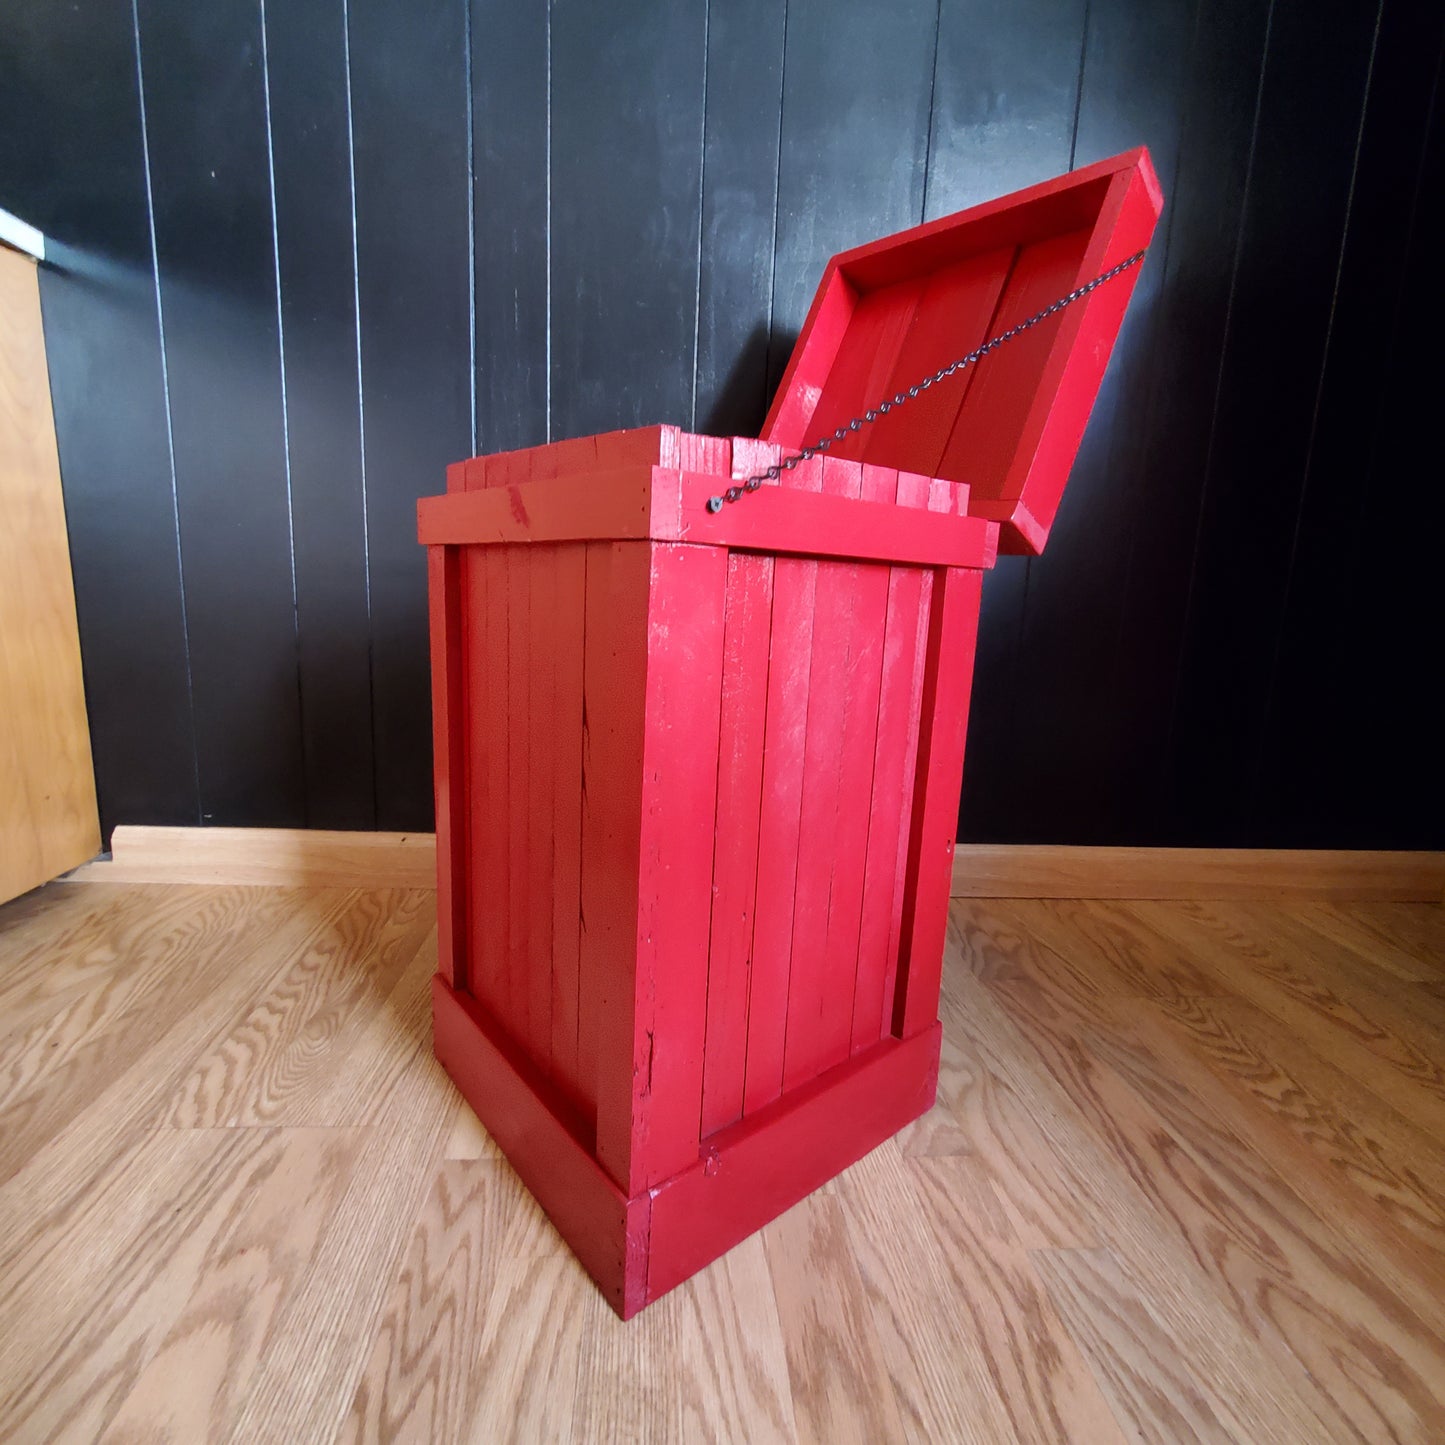 13 Gallon Red Trash Can